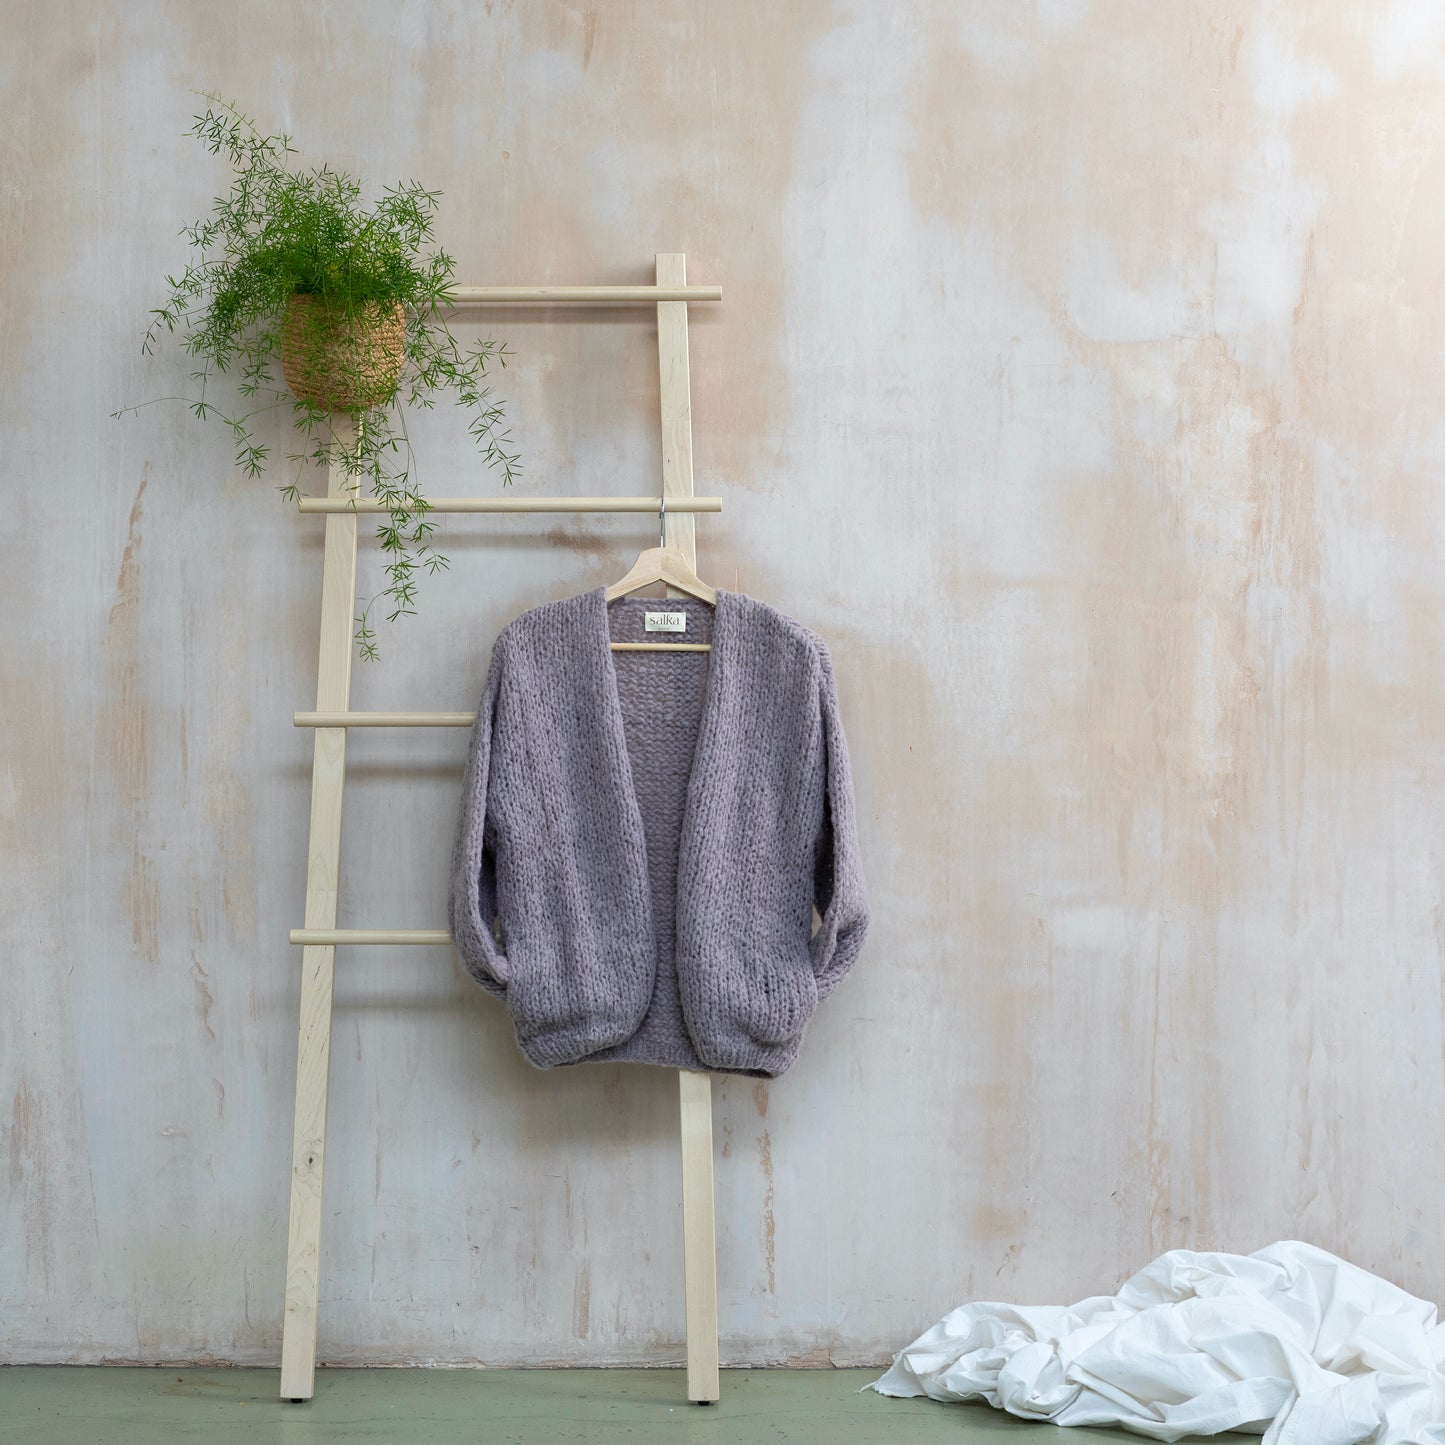 Lilac coloured hand knitted alpaca wool cardigan on wooden ladder. Super soft and cosy.